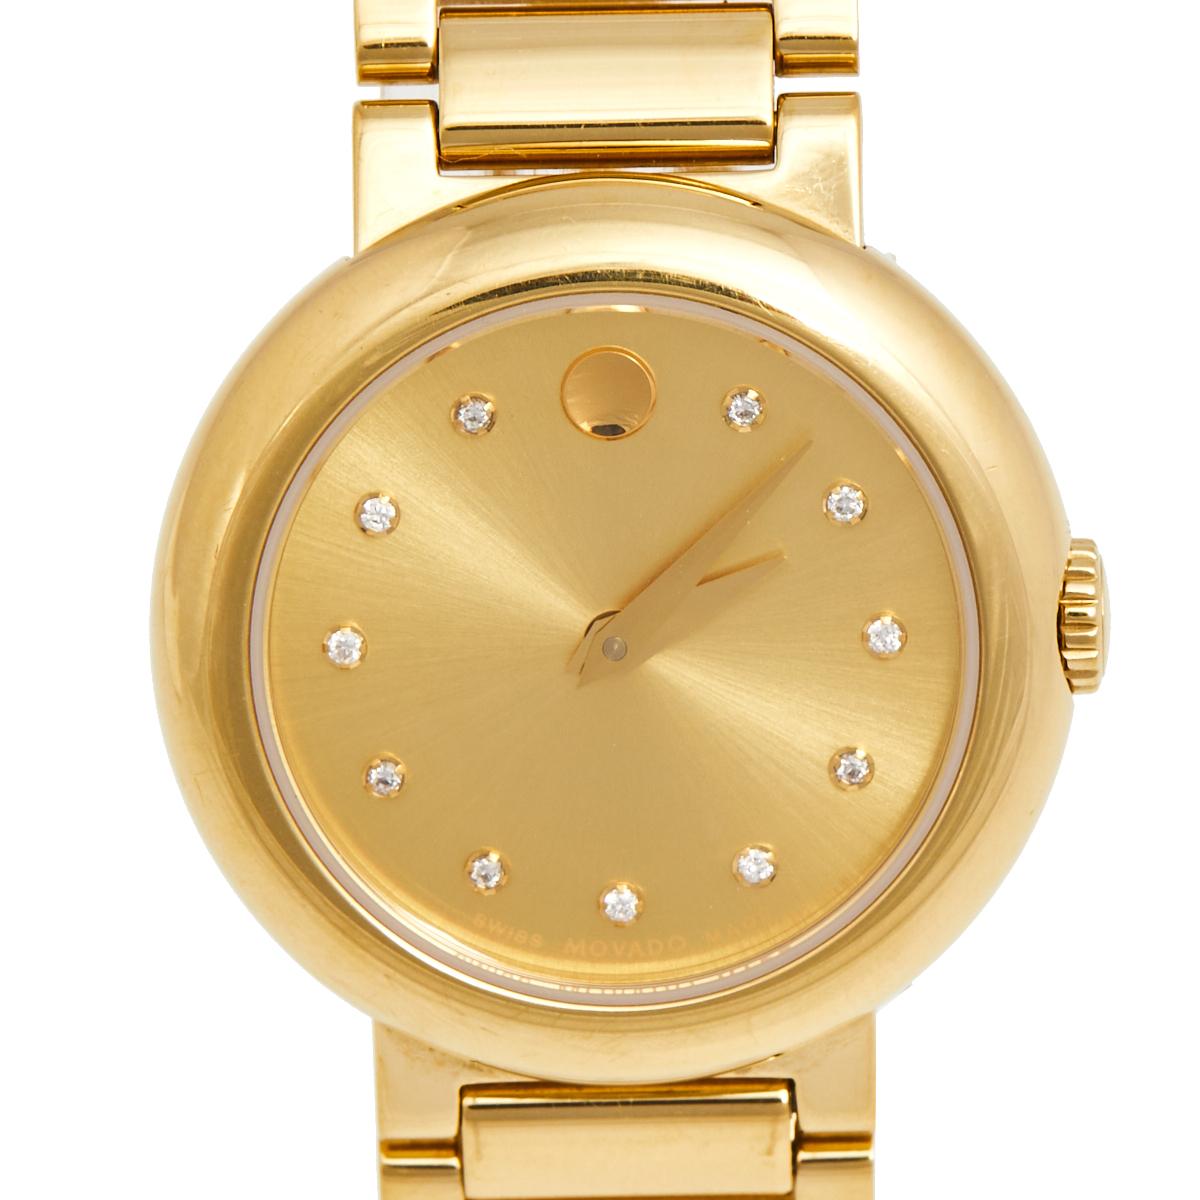 Built to assist you every day, this Movado wristwatch comes made from gold-plated stainless steel. The quartz watch features a yellow dial with diamond stud hour markers, two hands, and the signature Movado dot at 12 o'clock. It is water-resistant